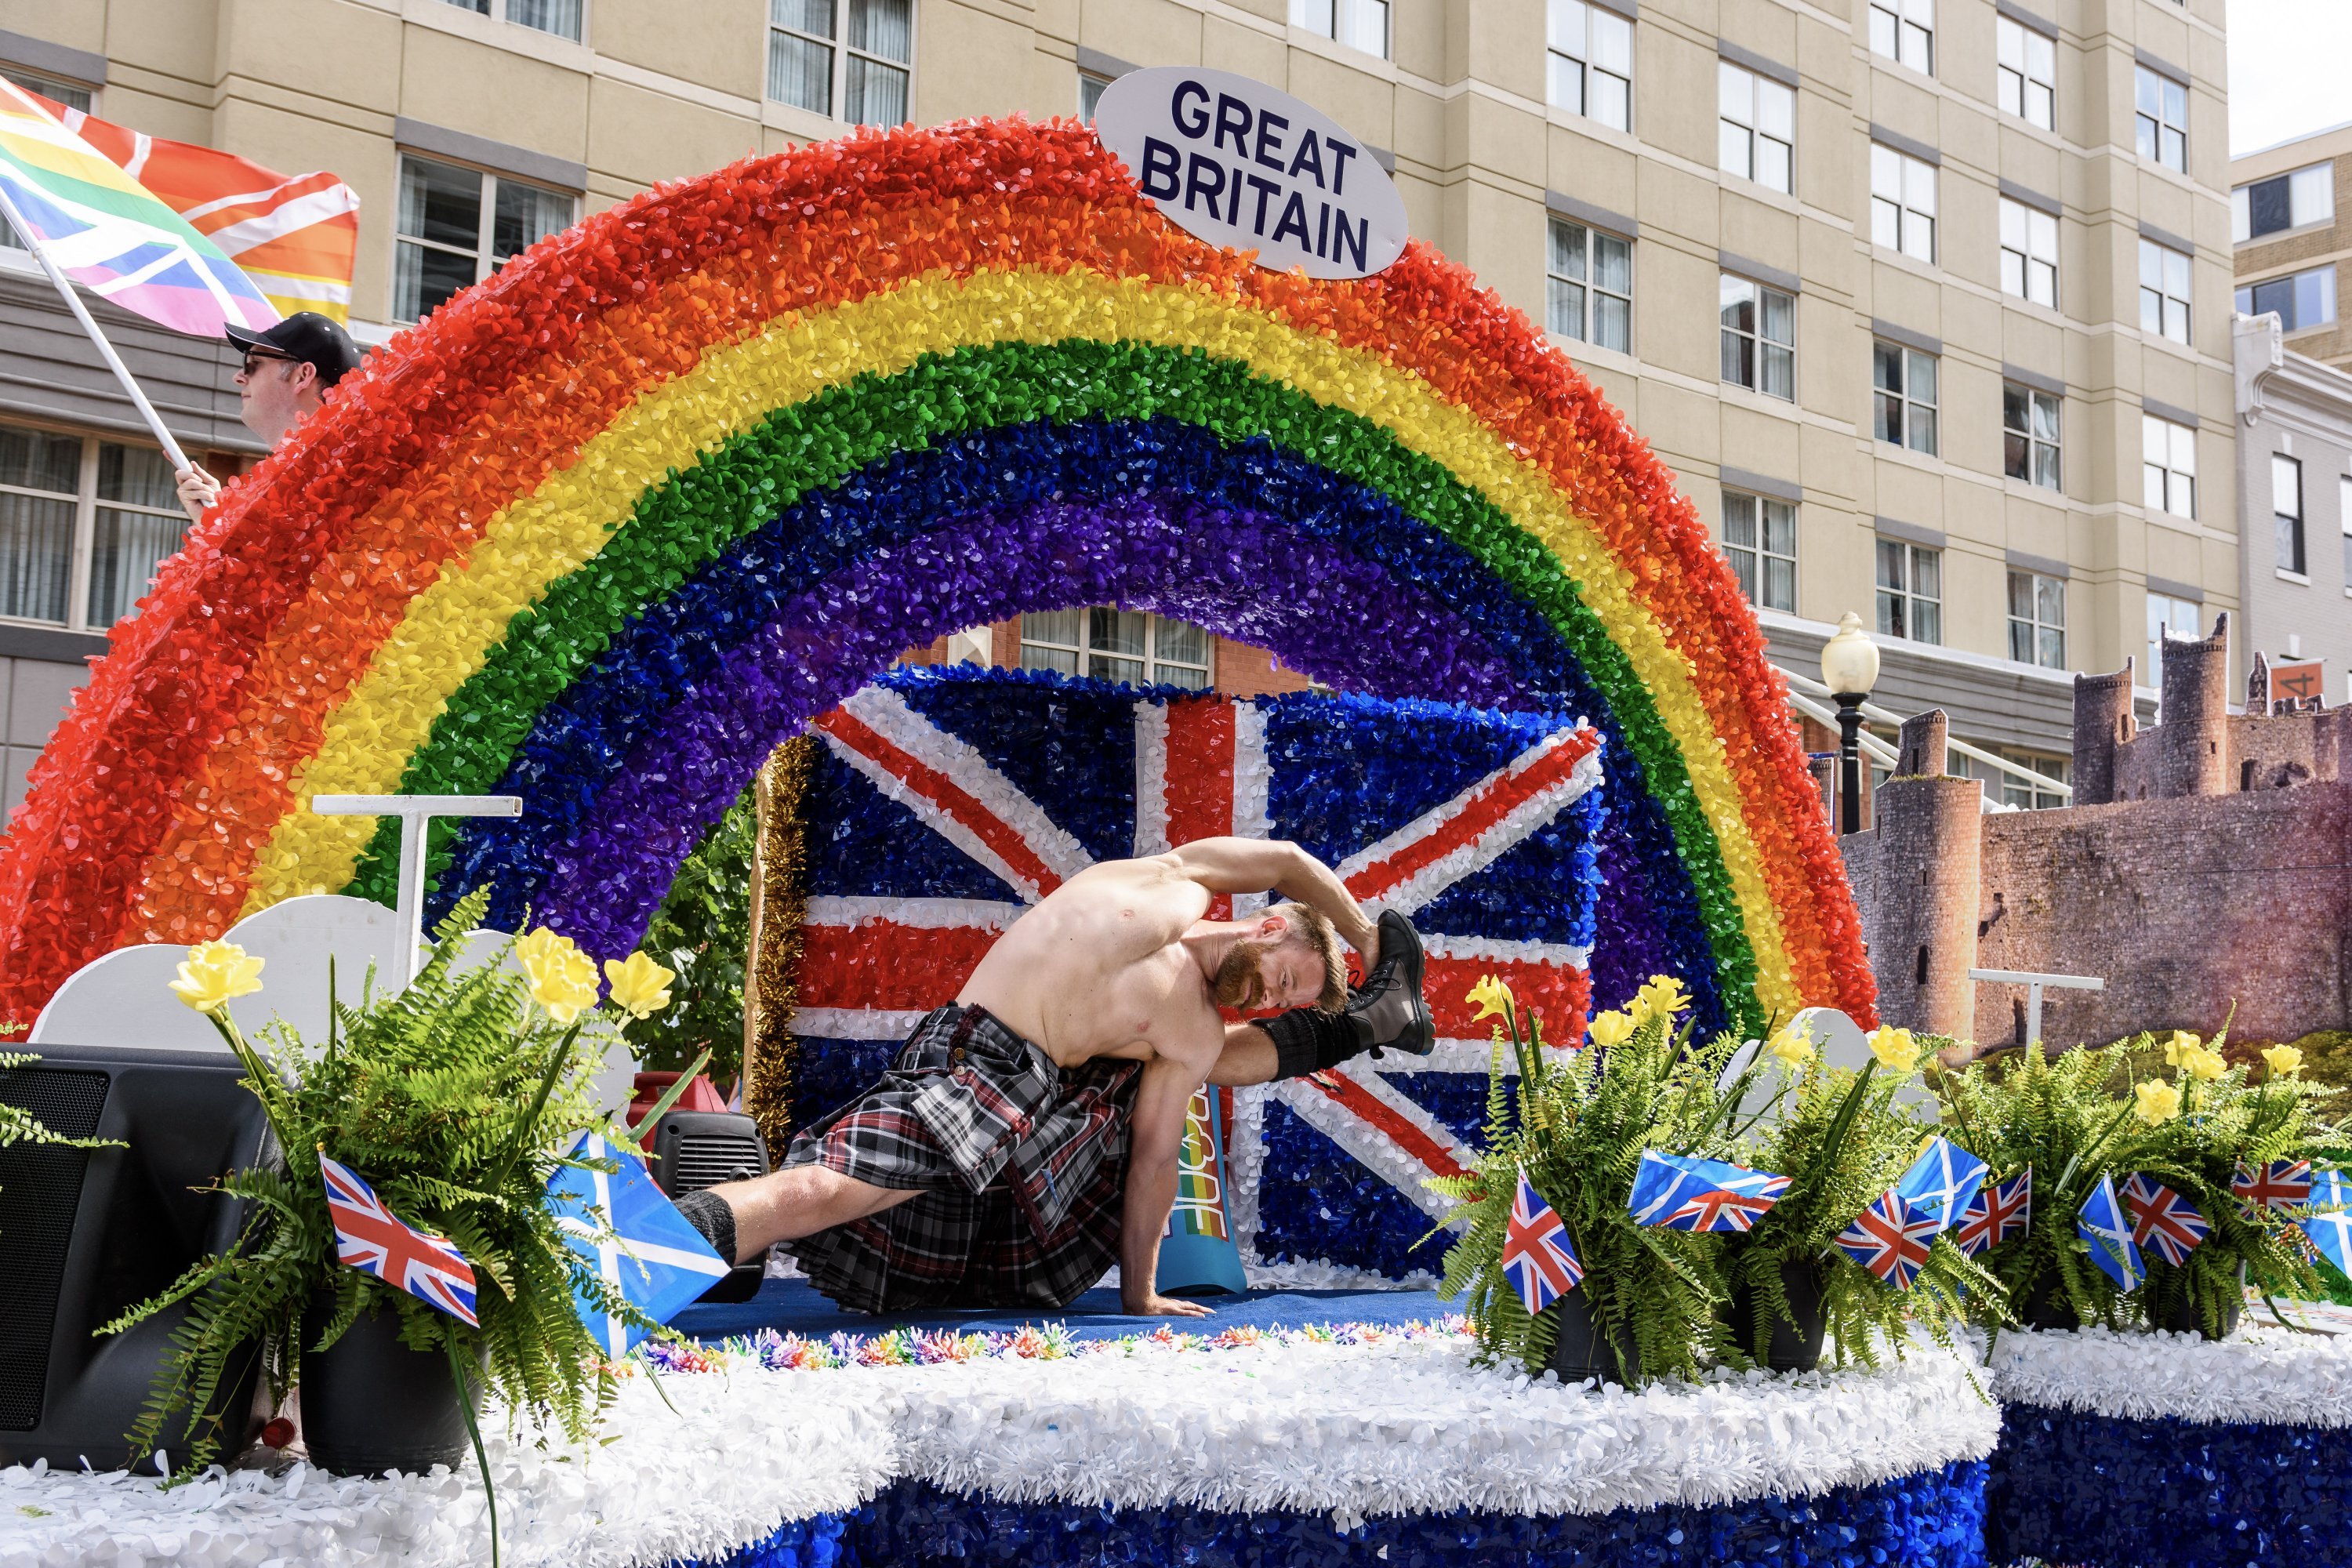 Scottish influencer Finley Wilson strikes a yoga pose in a kilt on the embassy float. Photograph by Scott Marder.